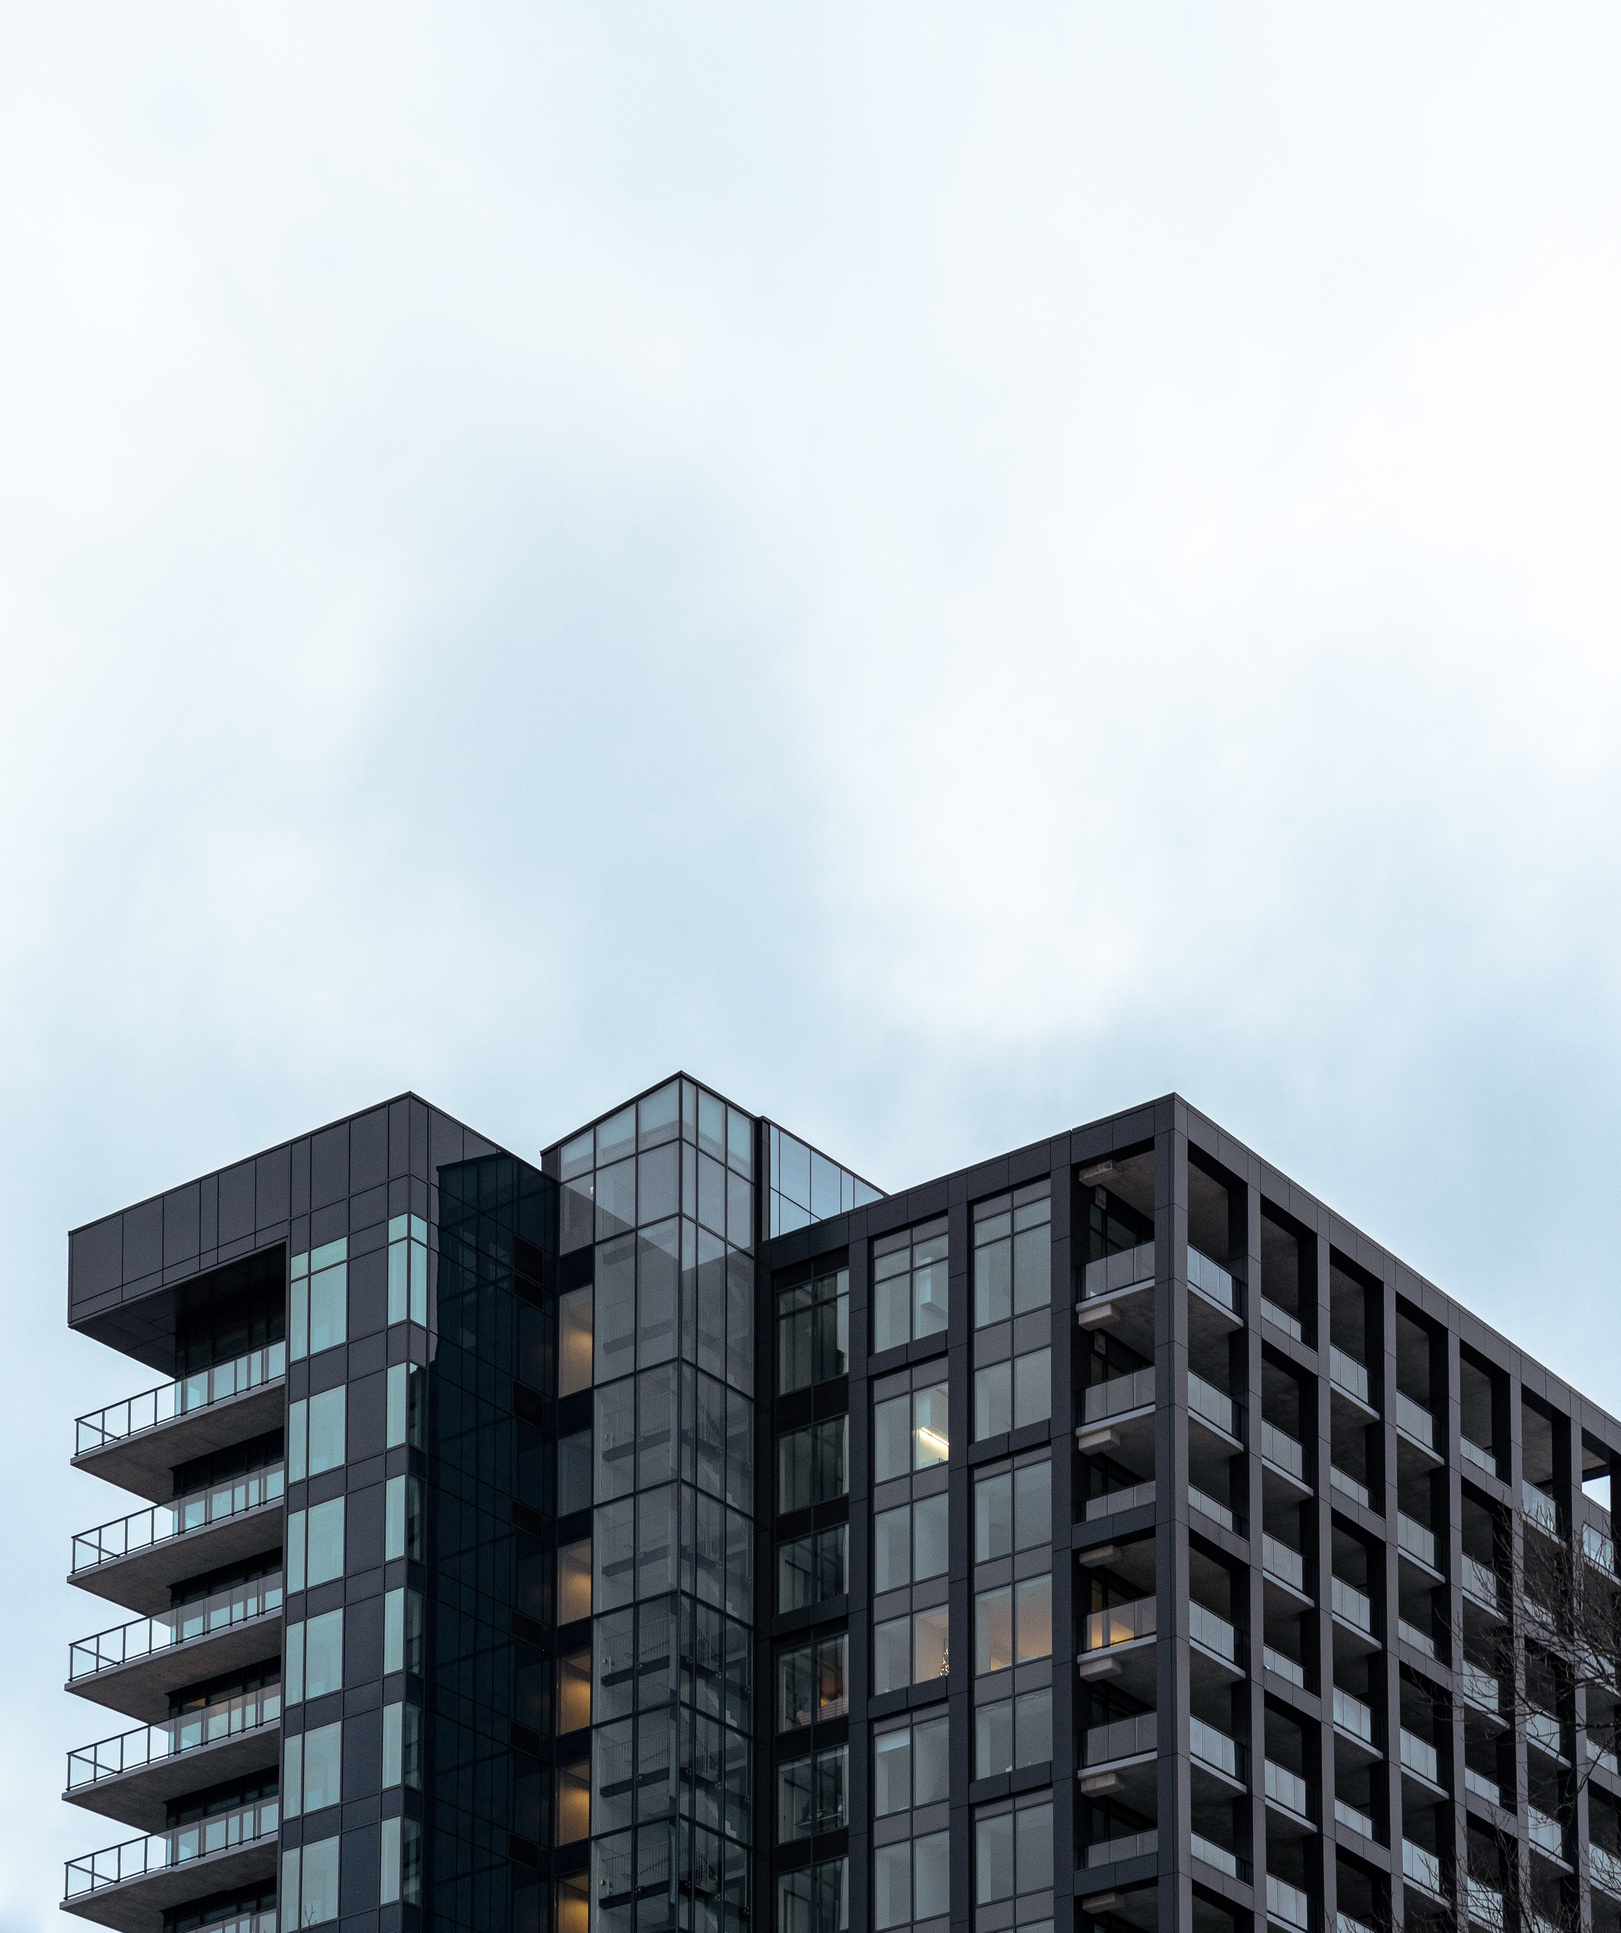 Modern multistage house exterior under cloudy sky in city